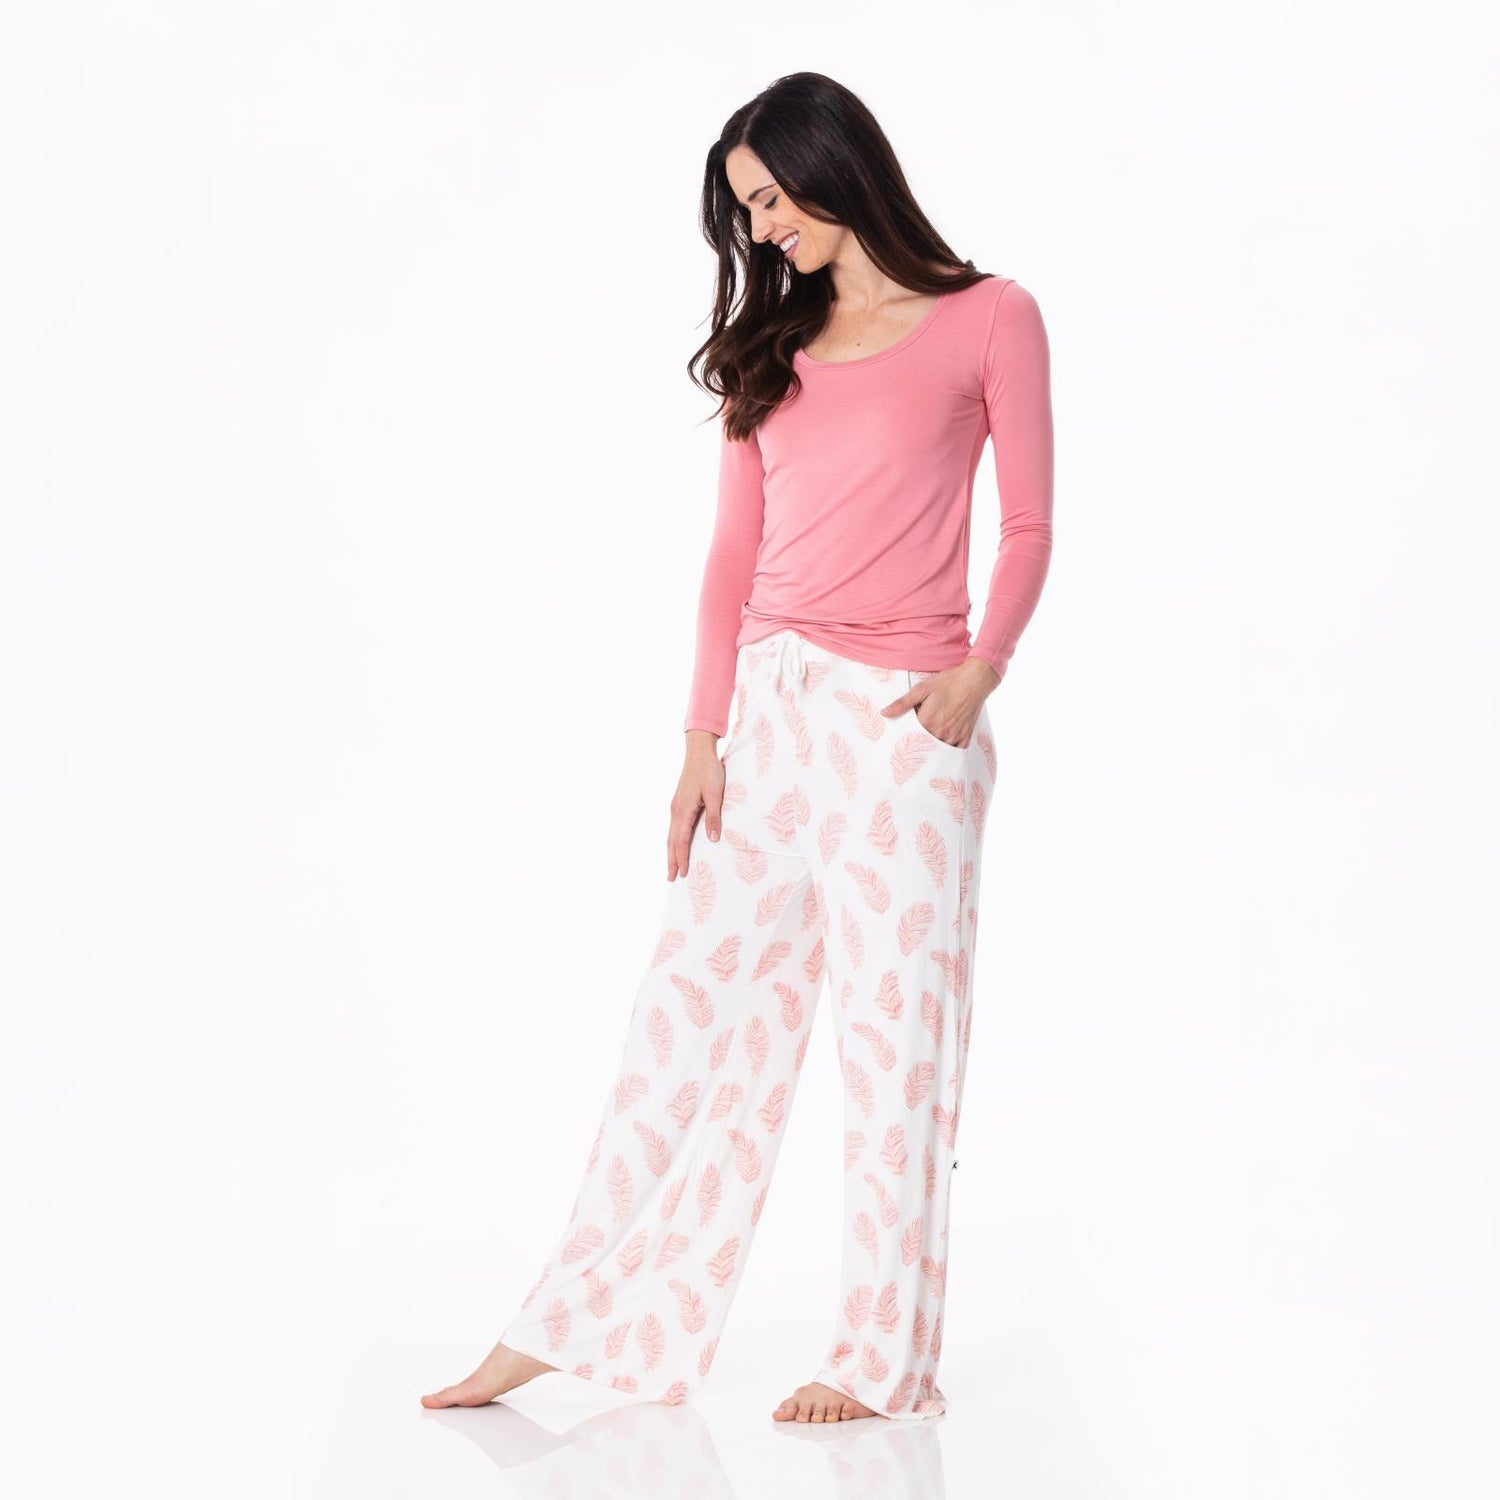 Women's Print Lounge Pants in Natural Feathers